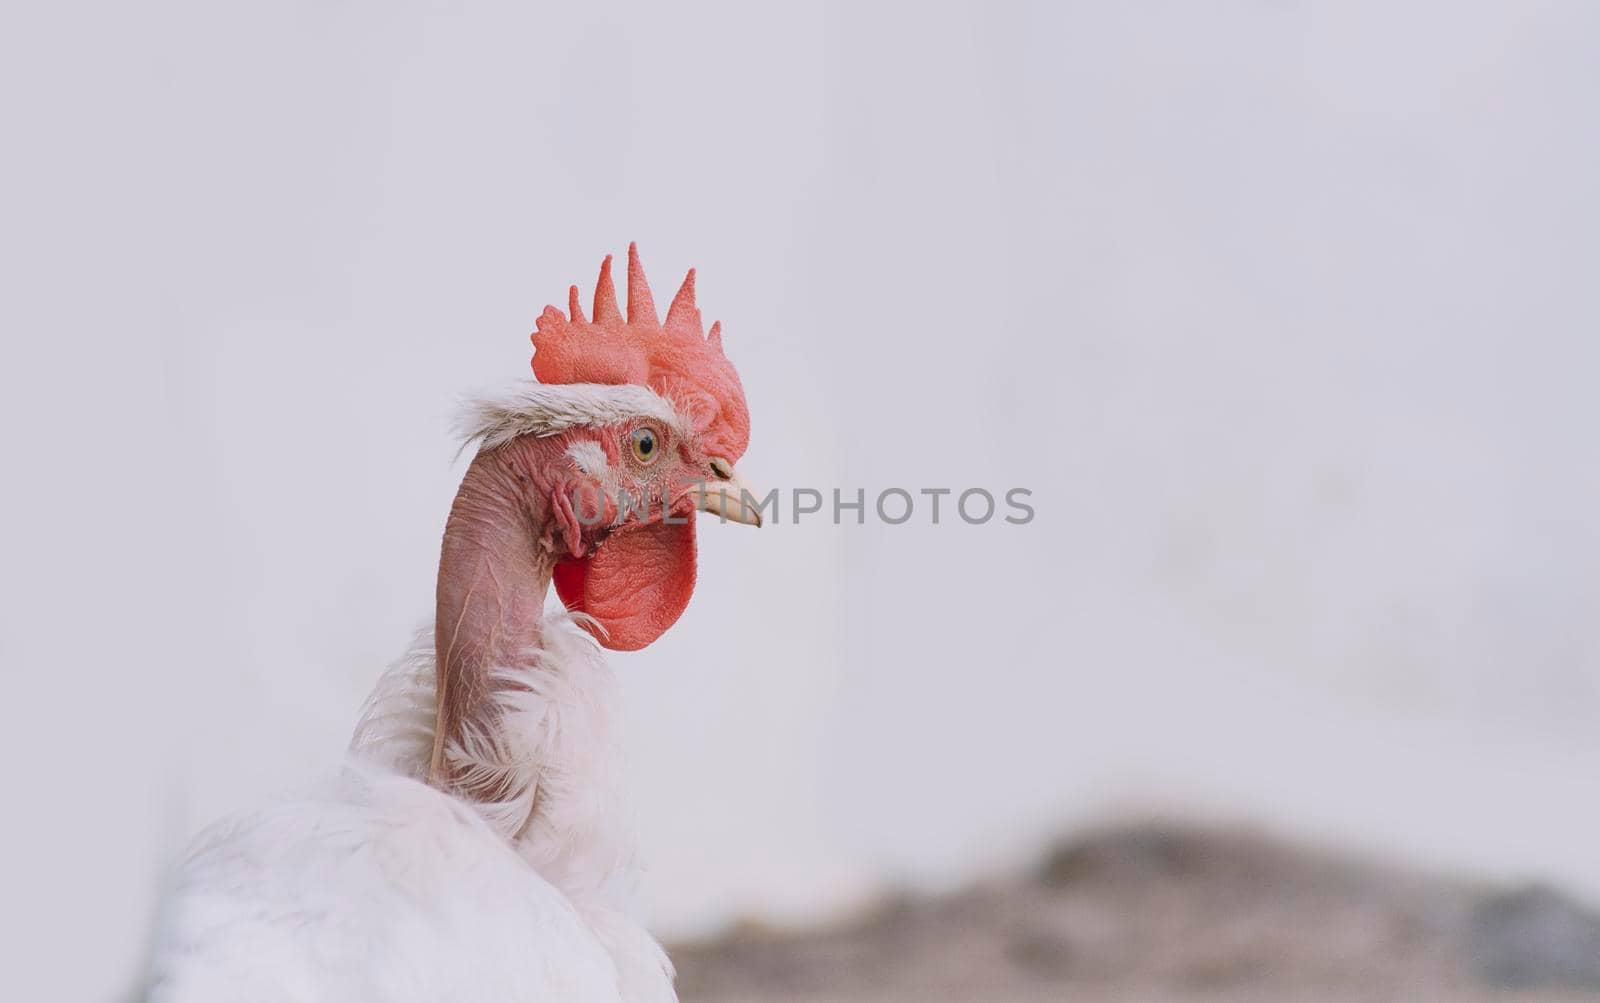 Crest of a pyroco rooster, close up of an Indian rooster, portrait of a pyroco rooster with a crest, concept of domestic animals. by isaiphoto